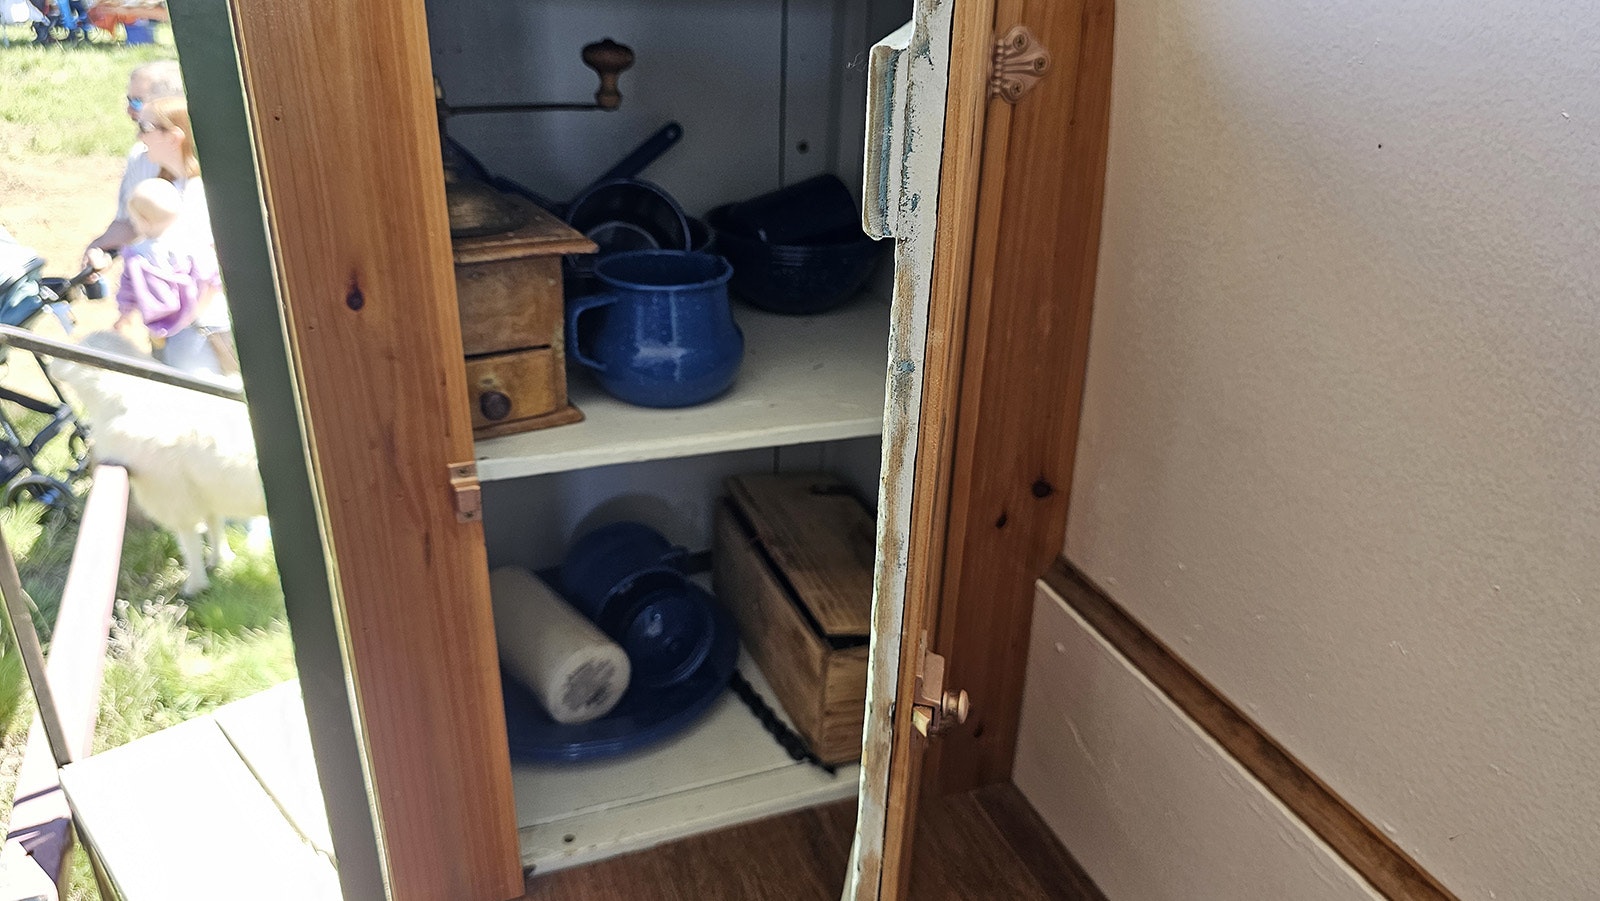 Inside the cupboard on The Pearl, some coffee cups, a coffee grinder, and other dishes.